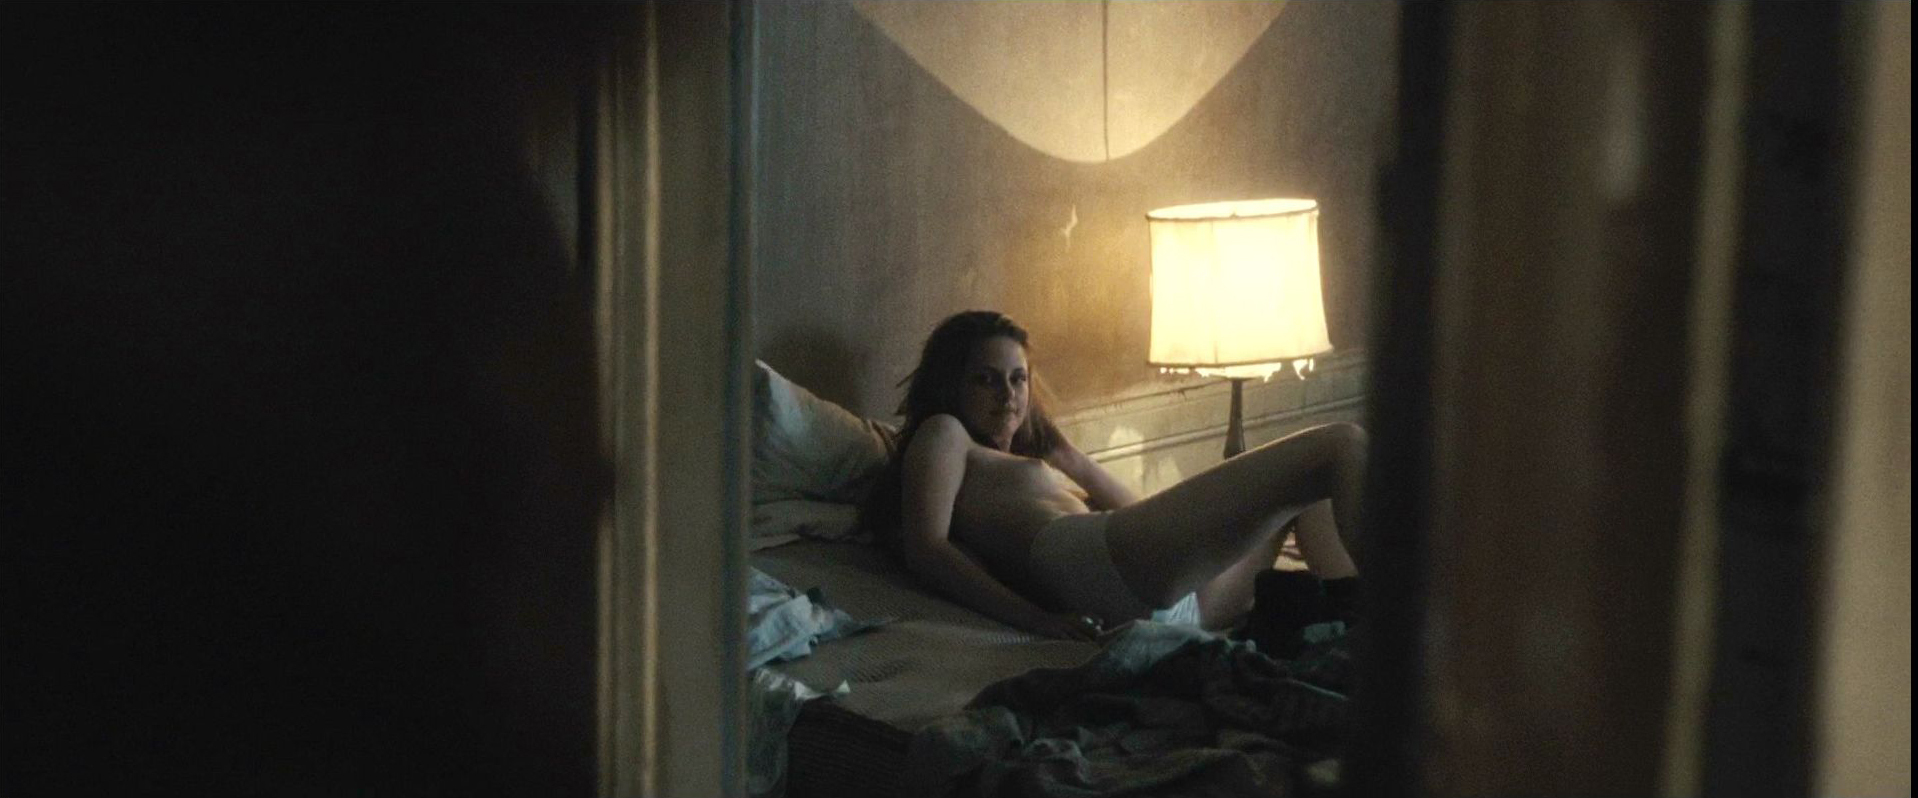 claire trethewey recommends Kristen Stewart Naked On The Road